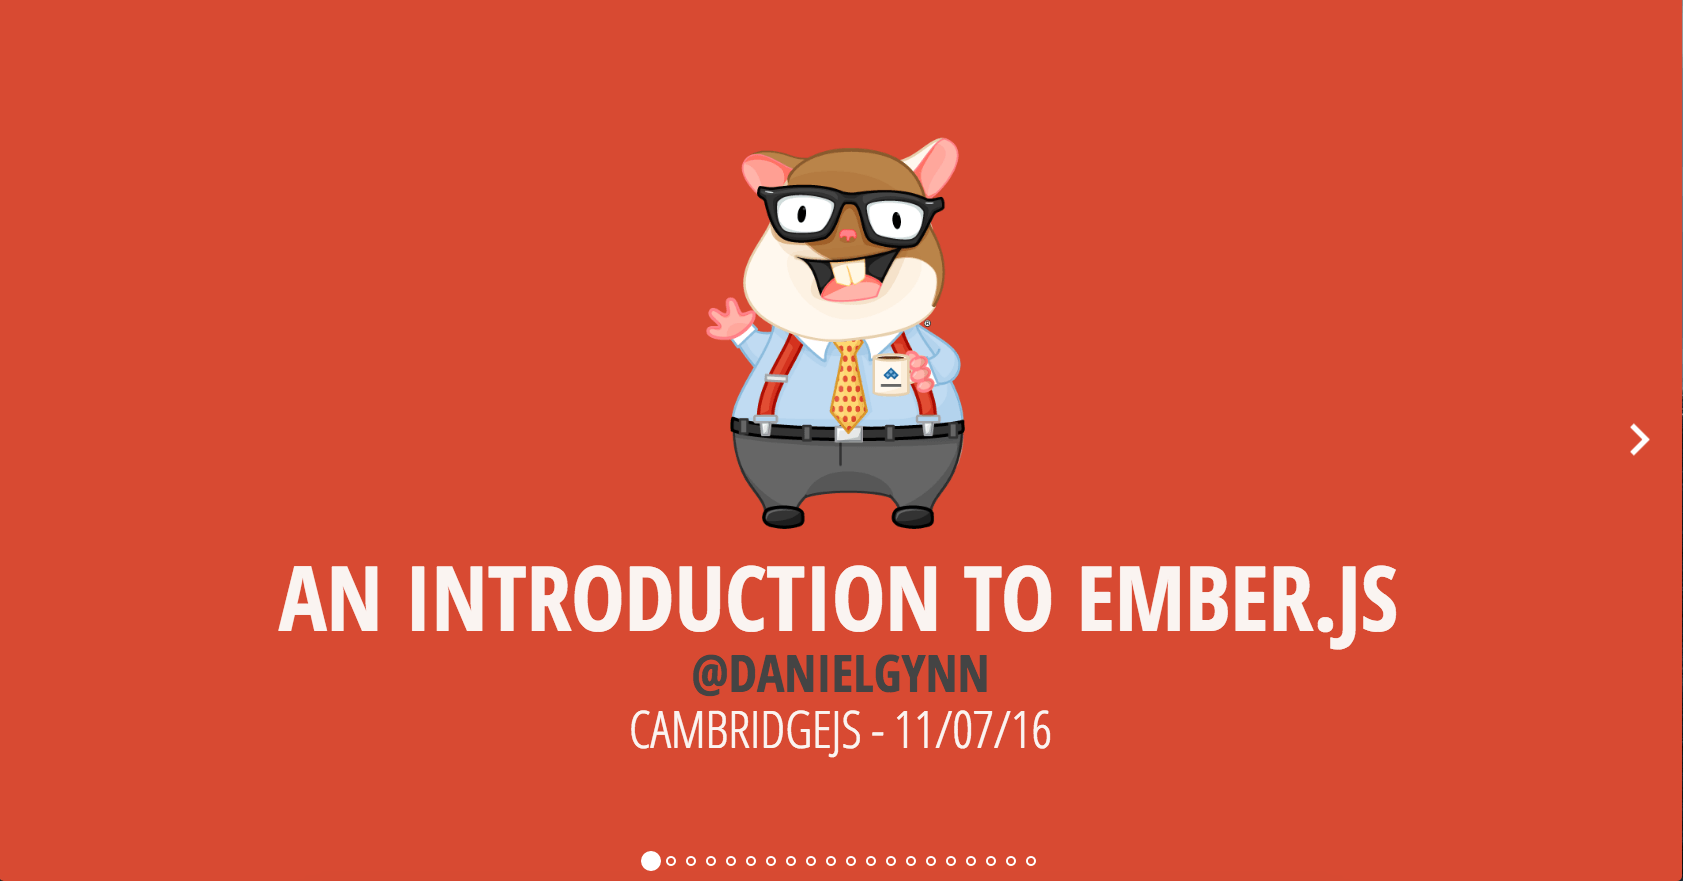 Ember.js Logo - Repositive - Building Ambitious Web Applications with Ember.js